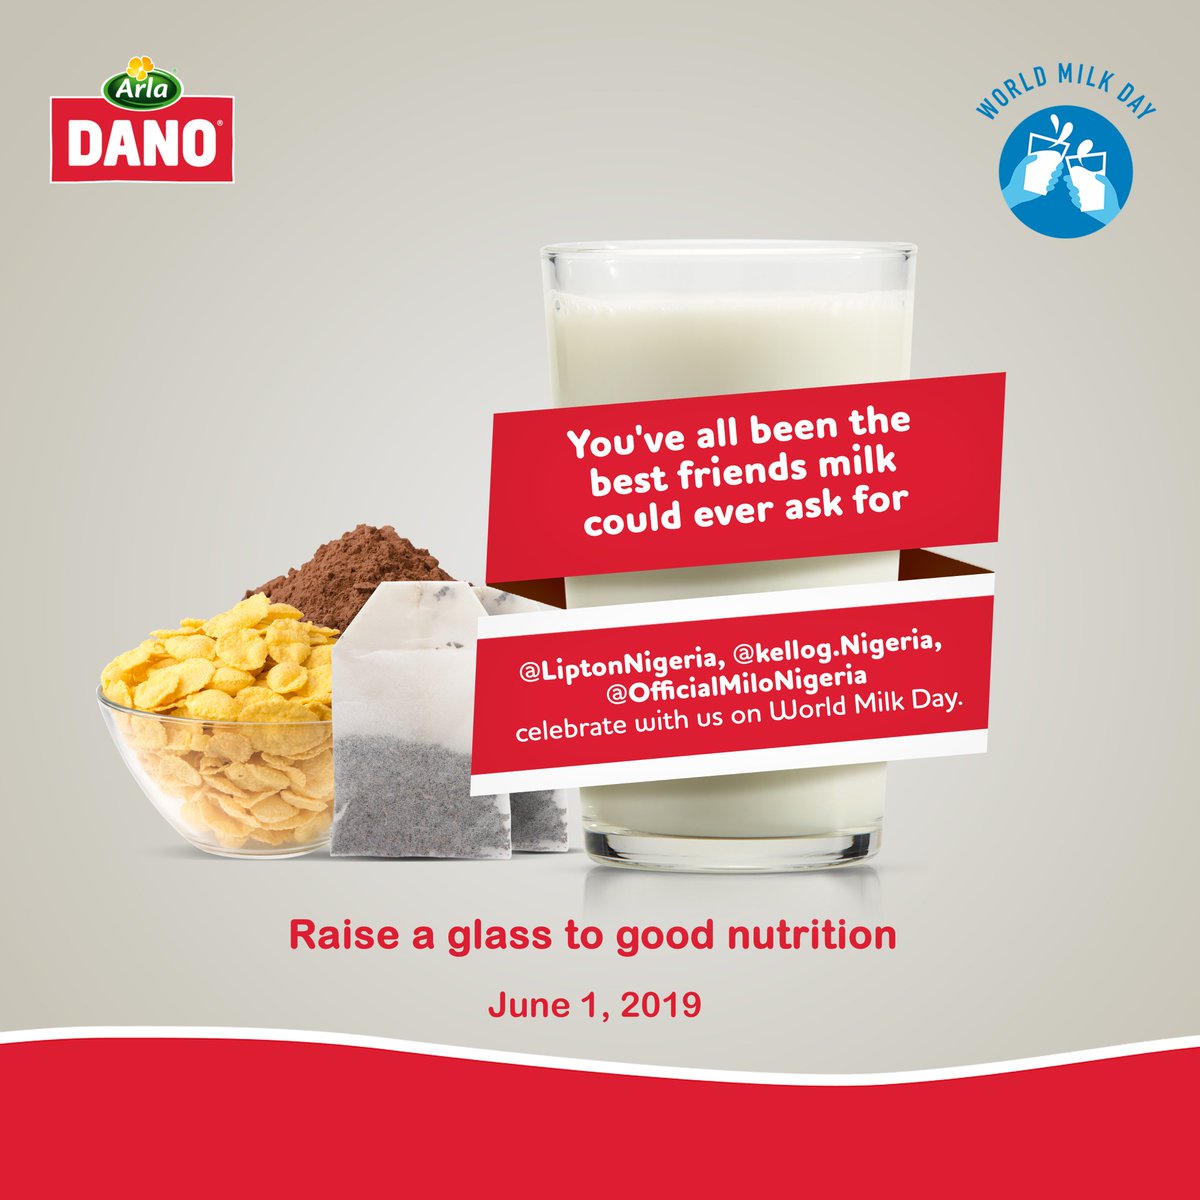 Dano Milk Nigeria En Twitter Milk Is Awesome By Itself And Just As Awesome When Used To Make The Perfect Combos Lipton Kelloggs Golden Morn And Milo Let S Make The Epic